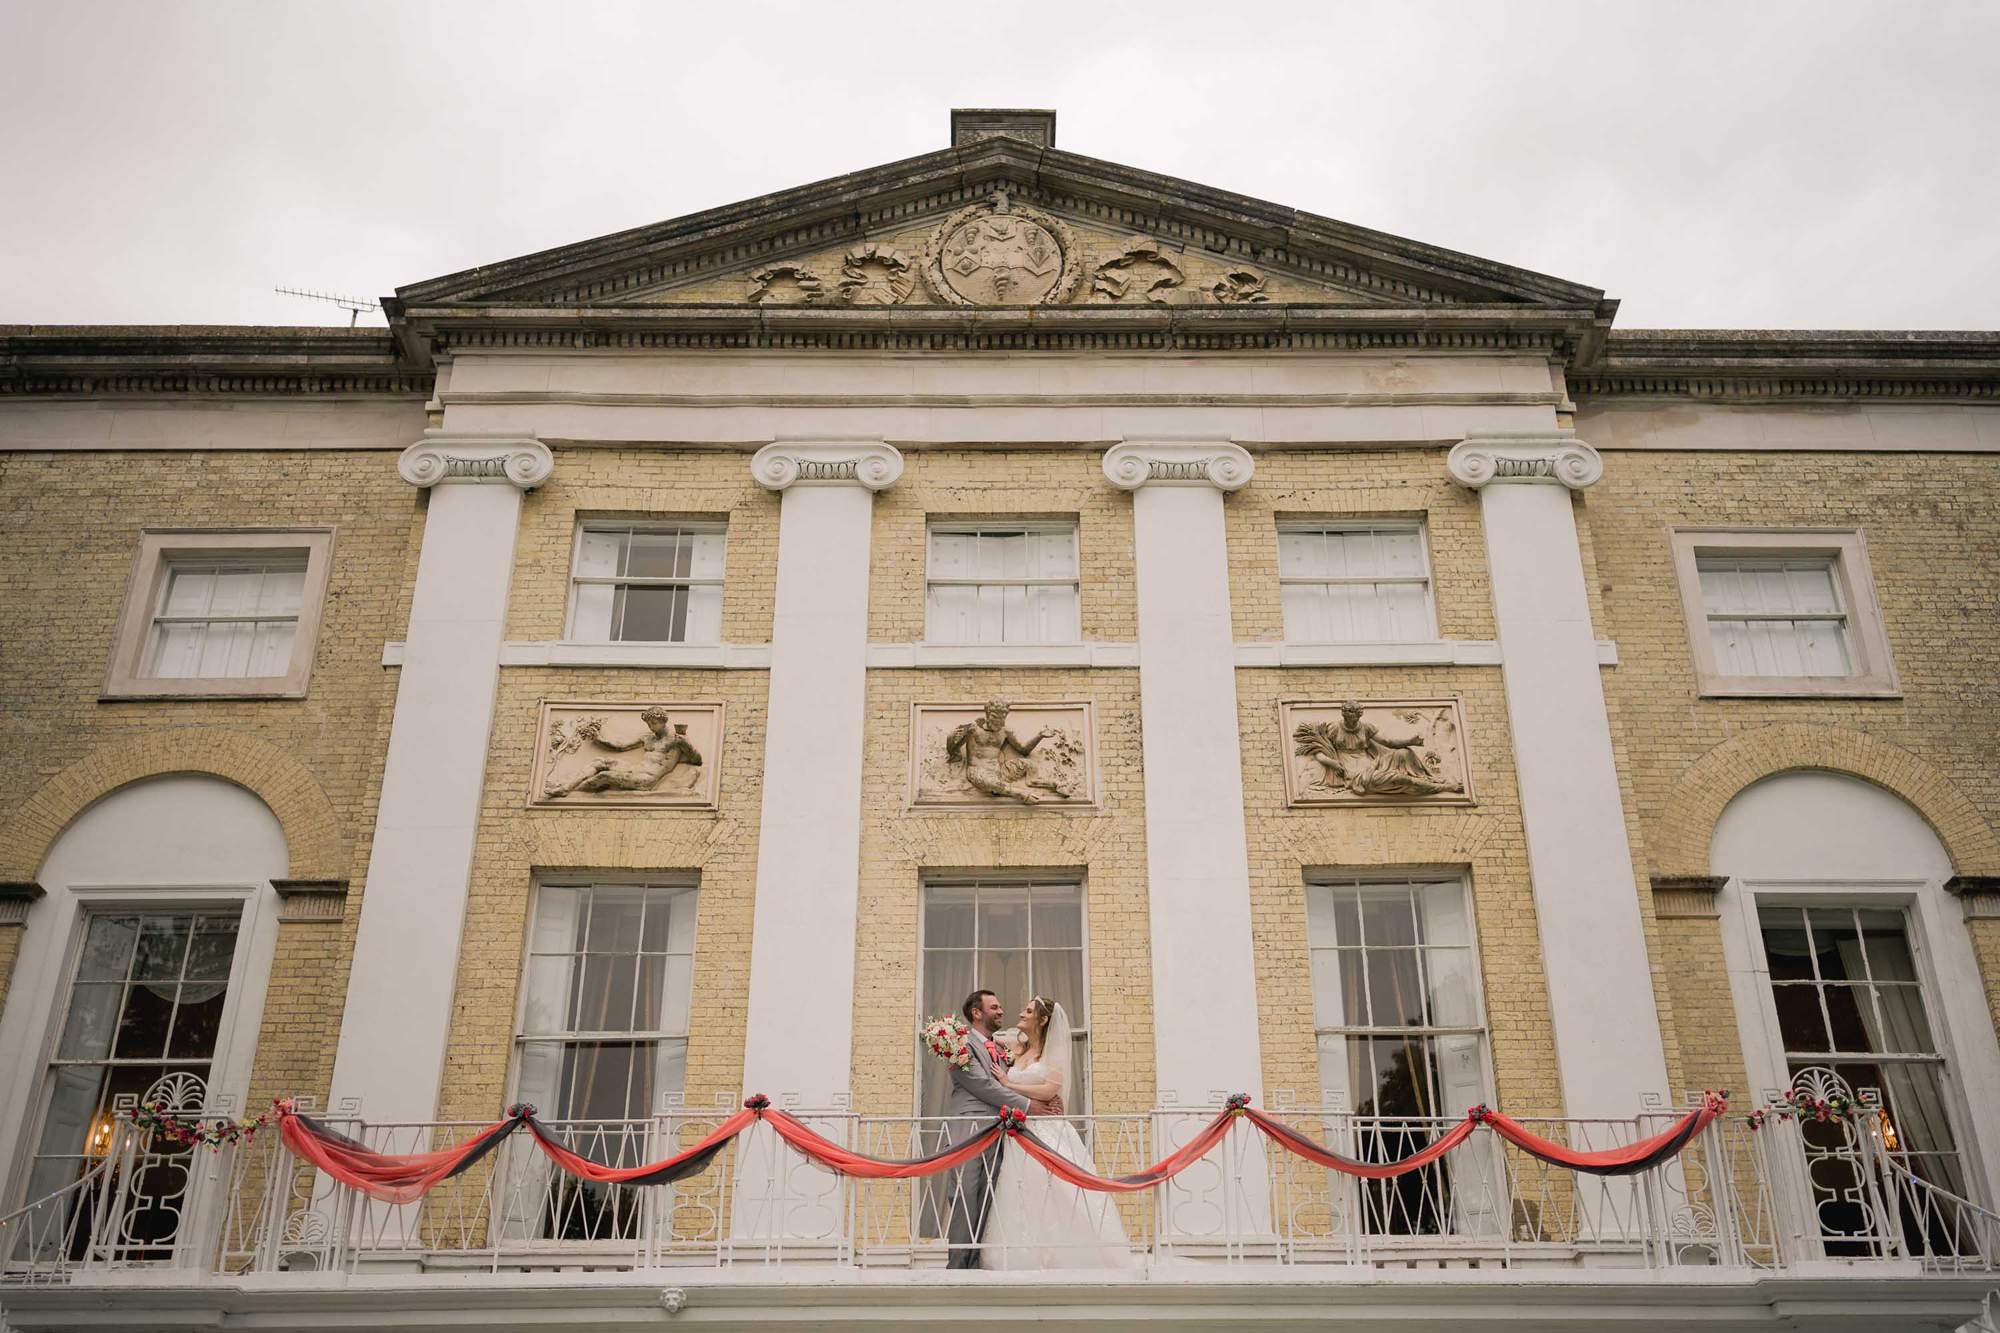 Bride and groom cuddle on their wedding day in front of Castle Goring in West Sussex.